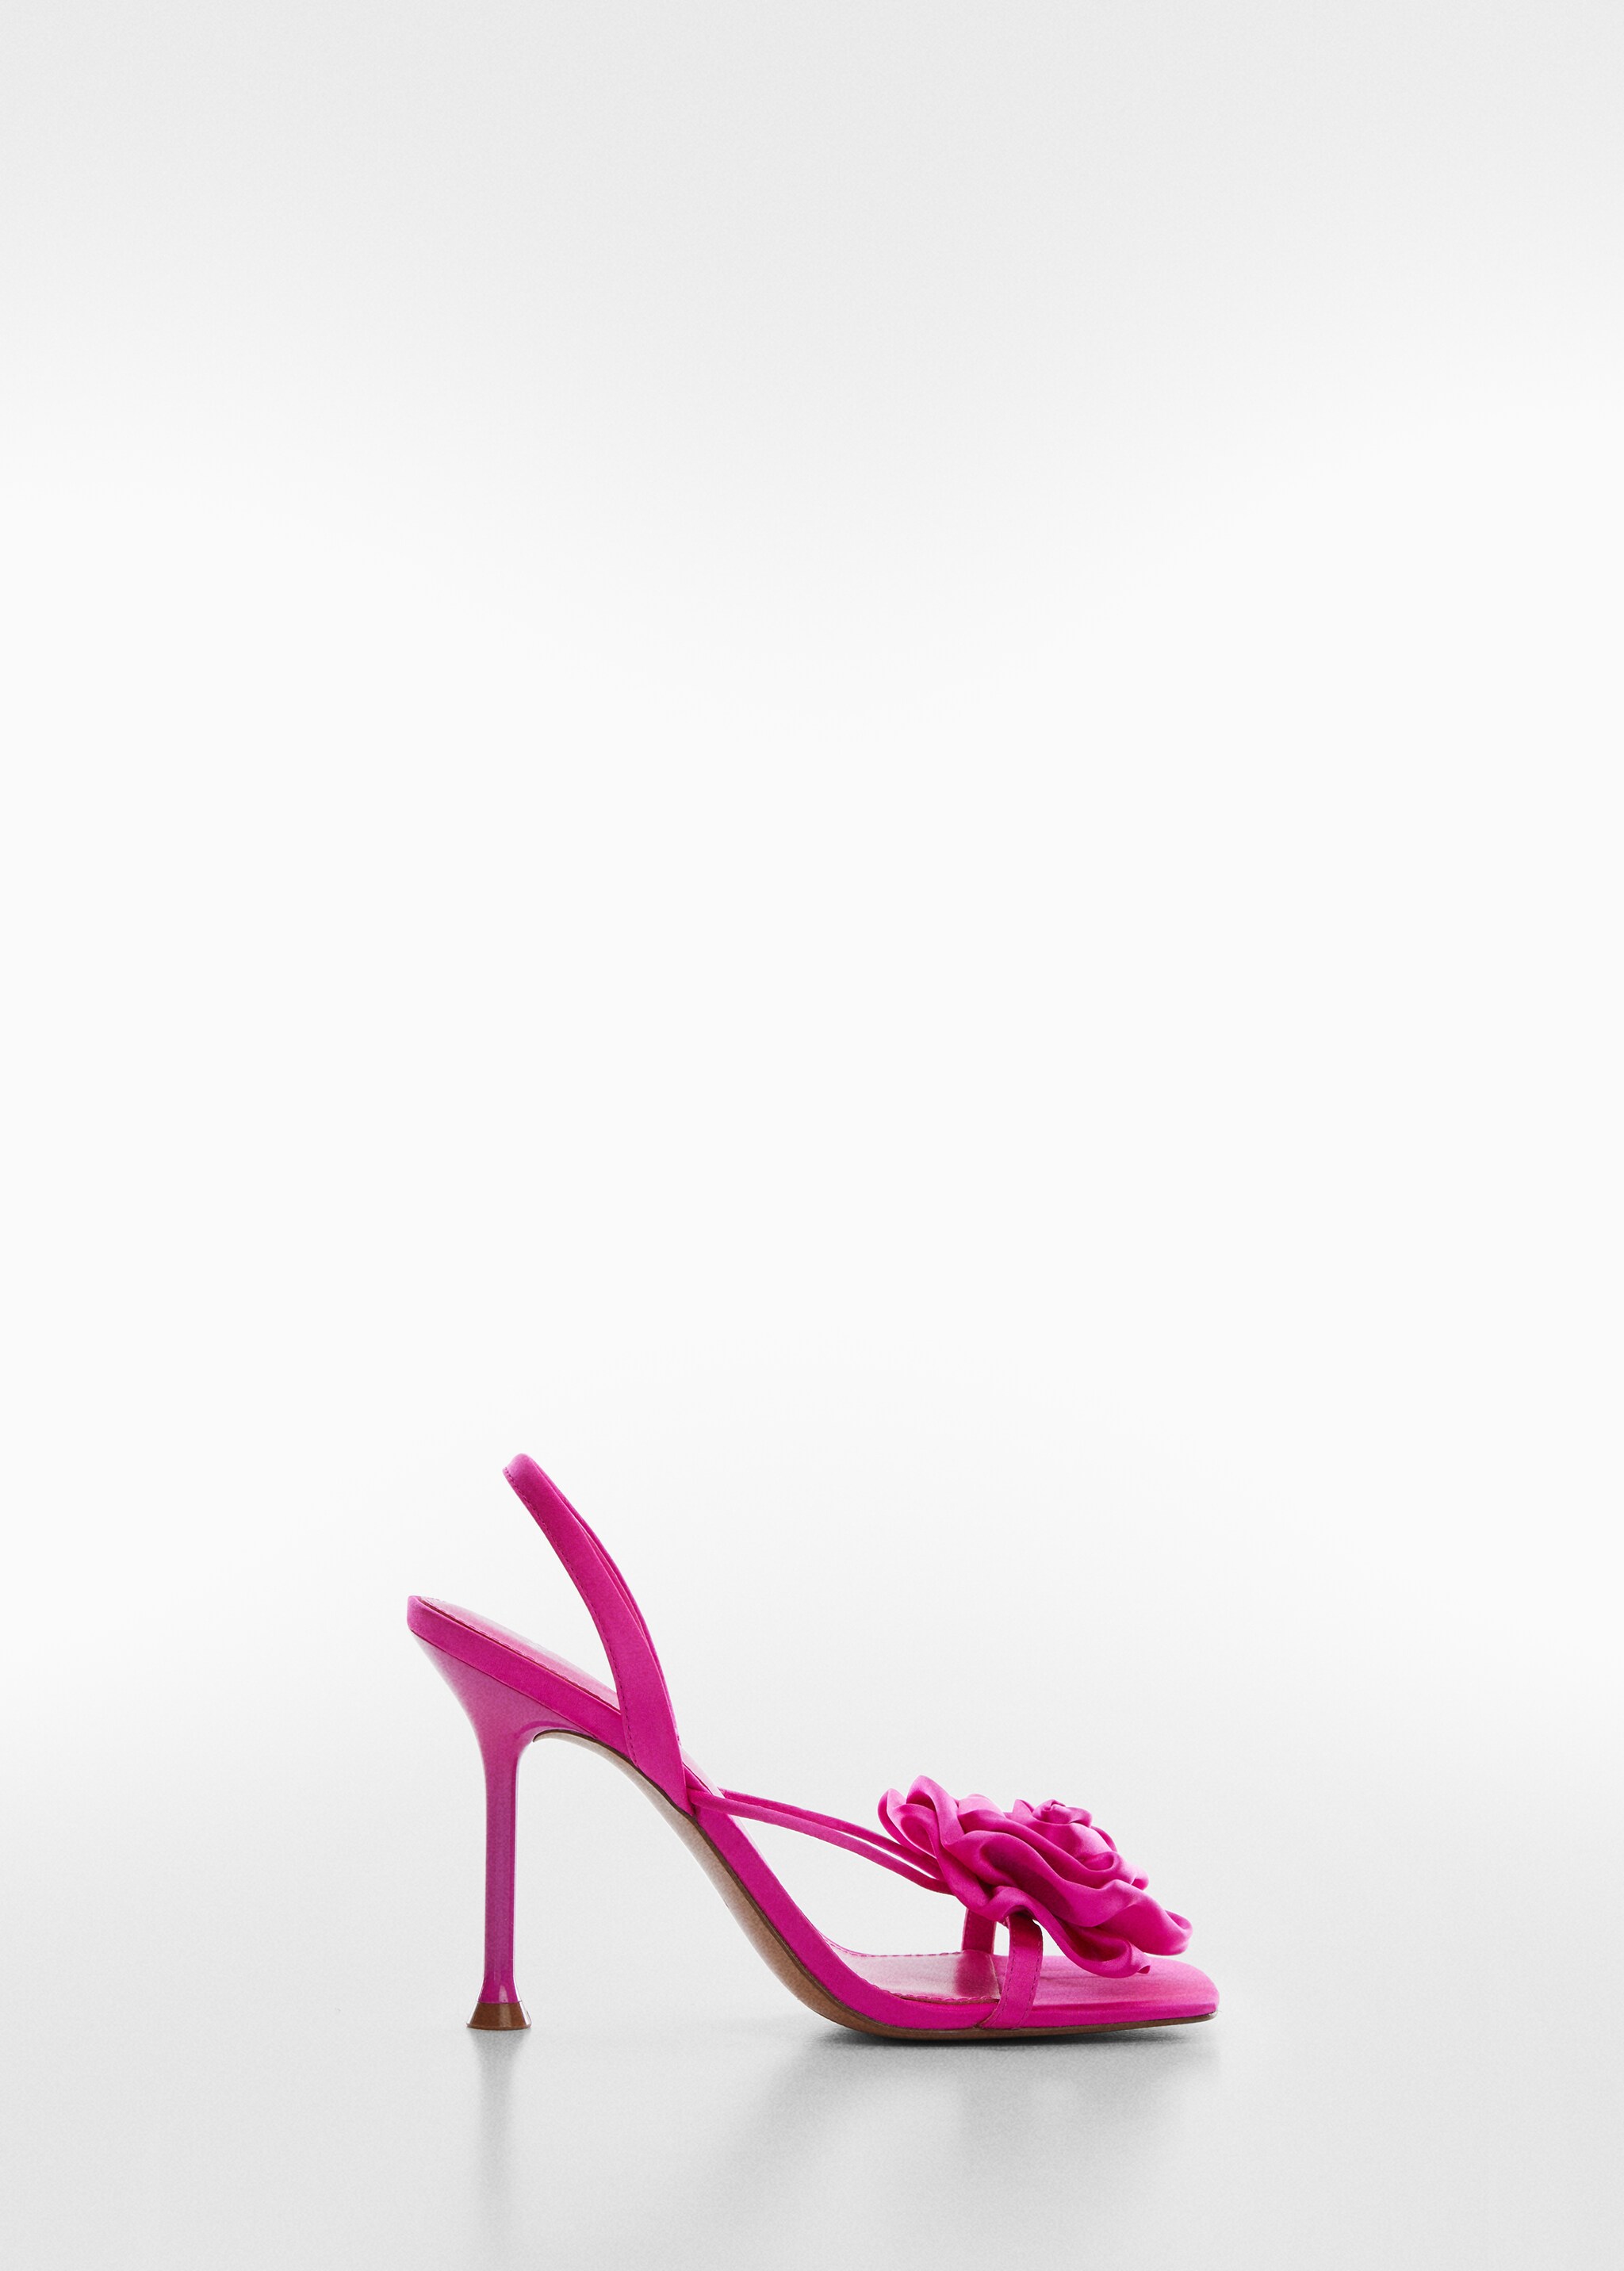 Maxi flower heeled sandal - Article without model